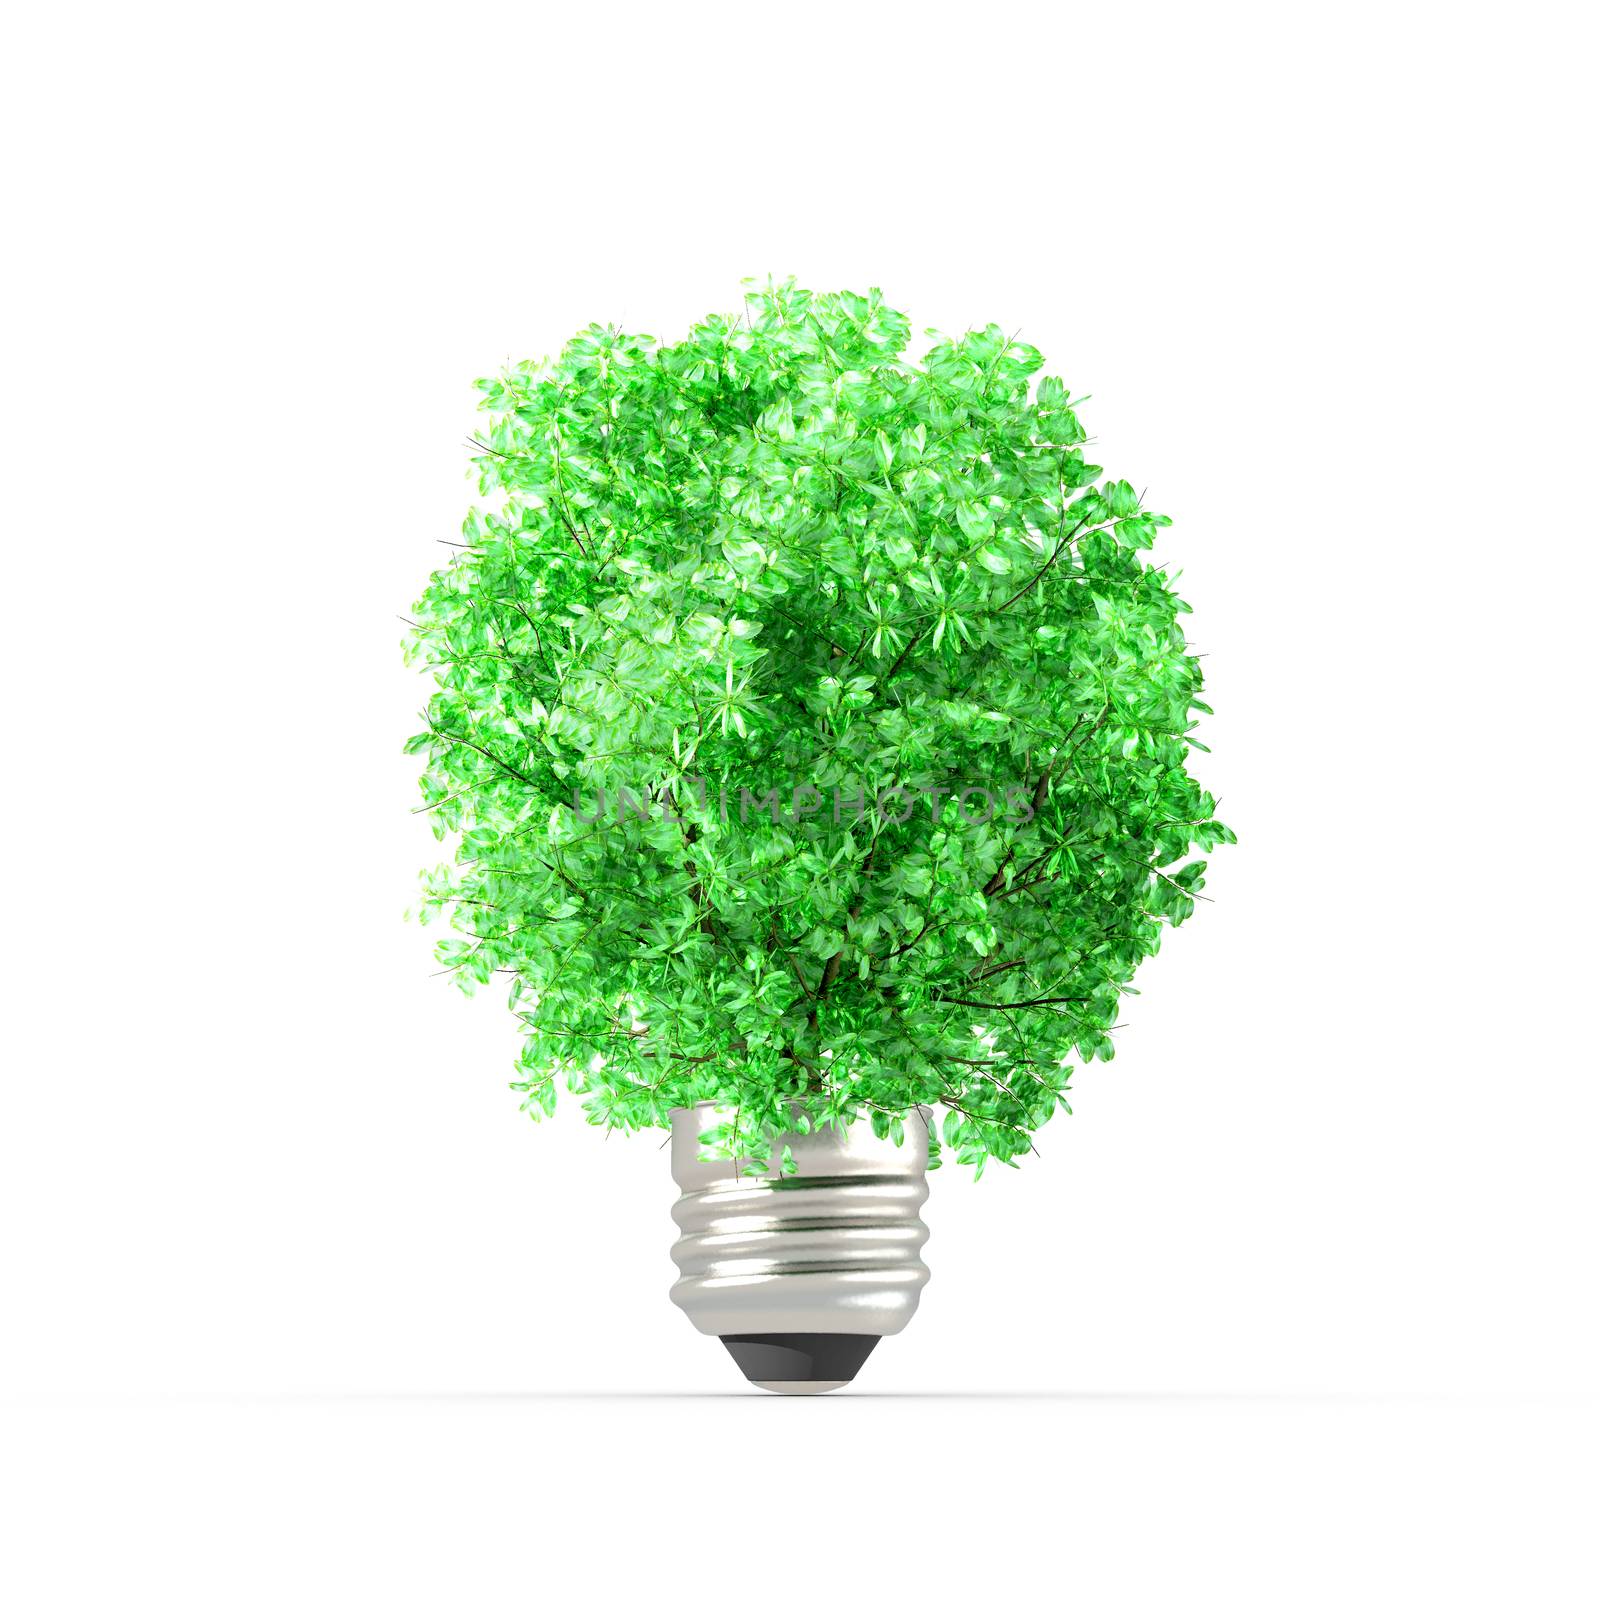 Concept of plant replacing the light bulb. Ecology metaphor. 3D Rendering